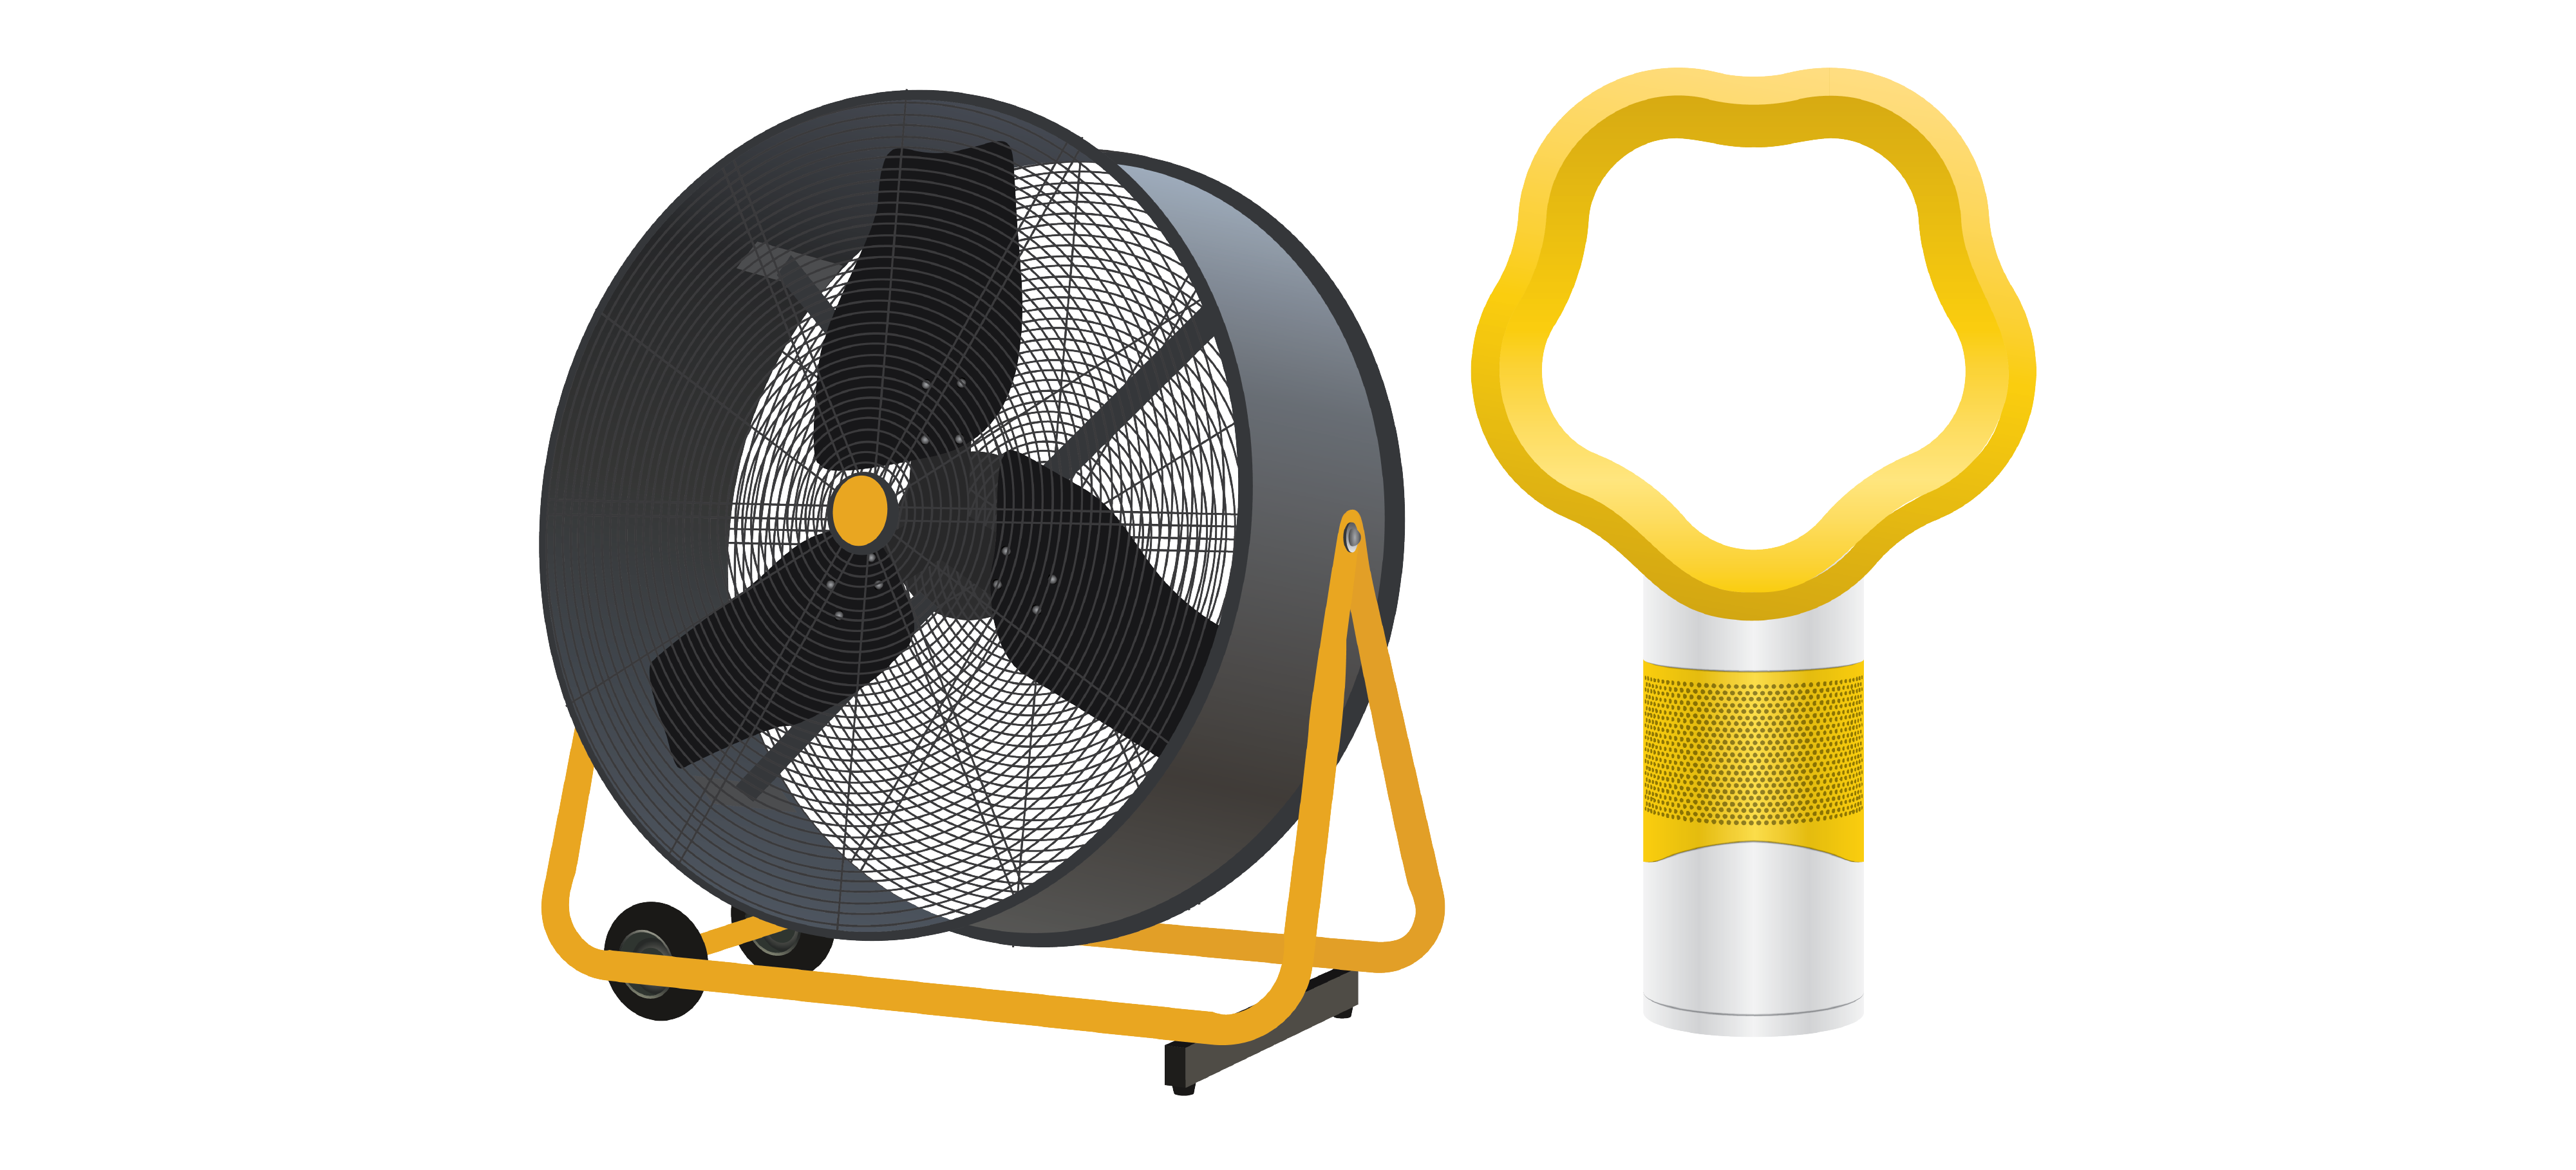 Two fans. Left: large industrial black and yellow fan with blades on wheels. Right: modern and silver yellow fan with no blades.